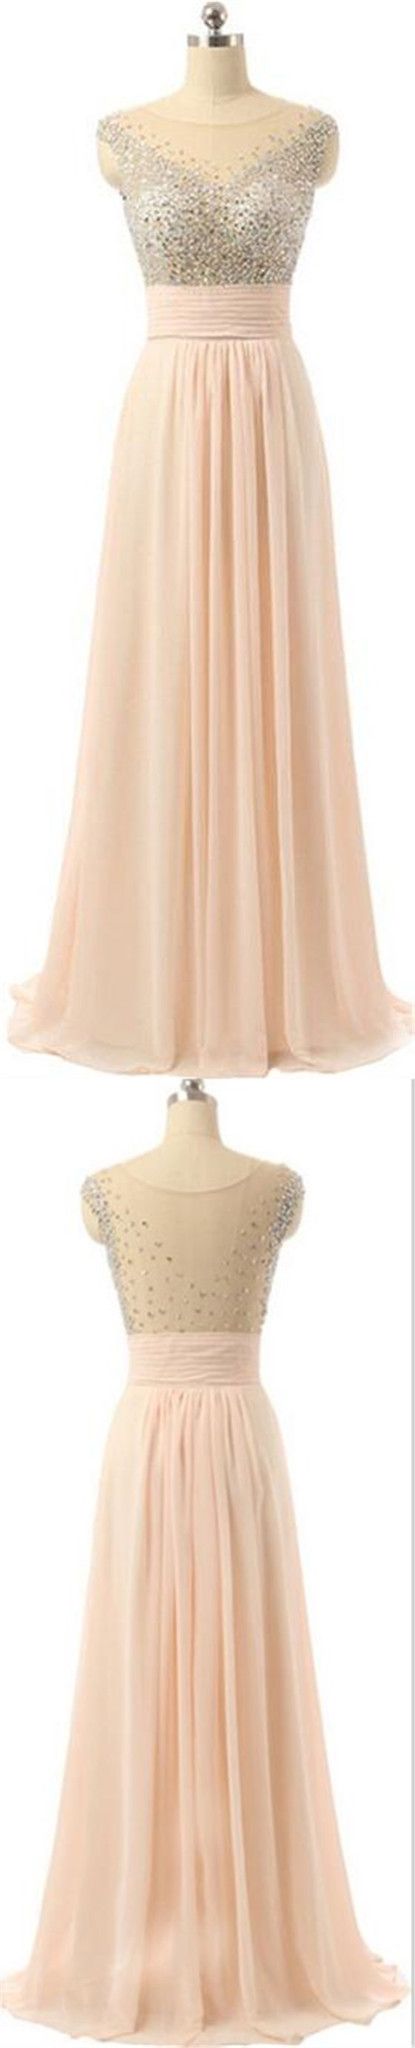 2017 Pink Beaded Chiffon See-through Back Charming Cocktail Evening Prom Dresses